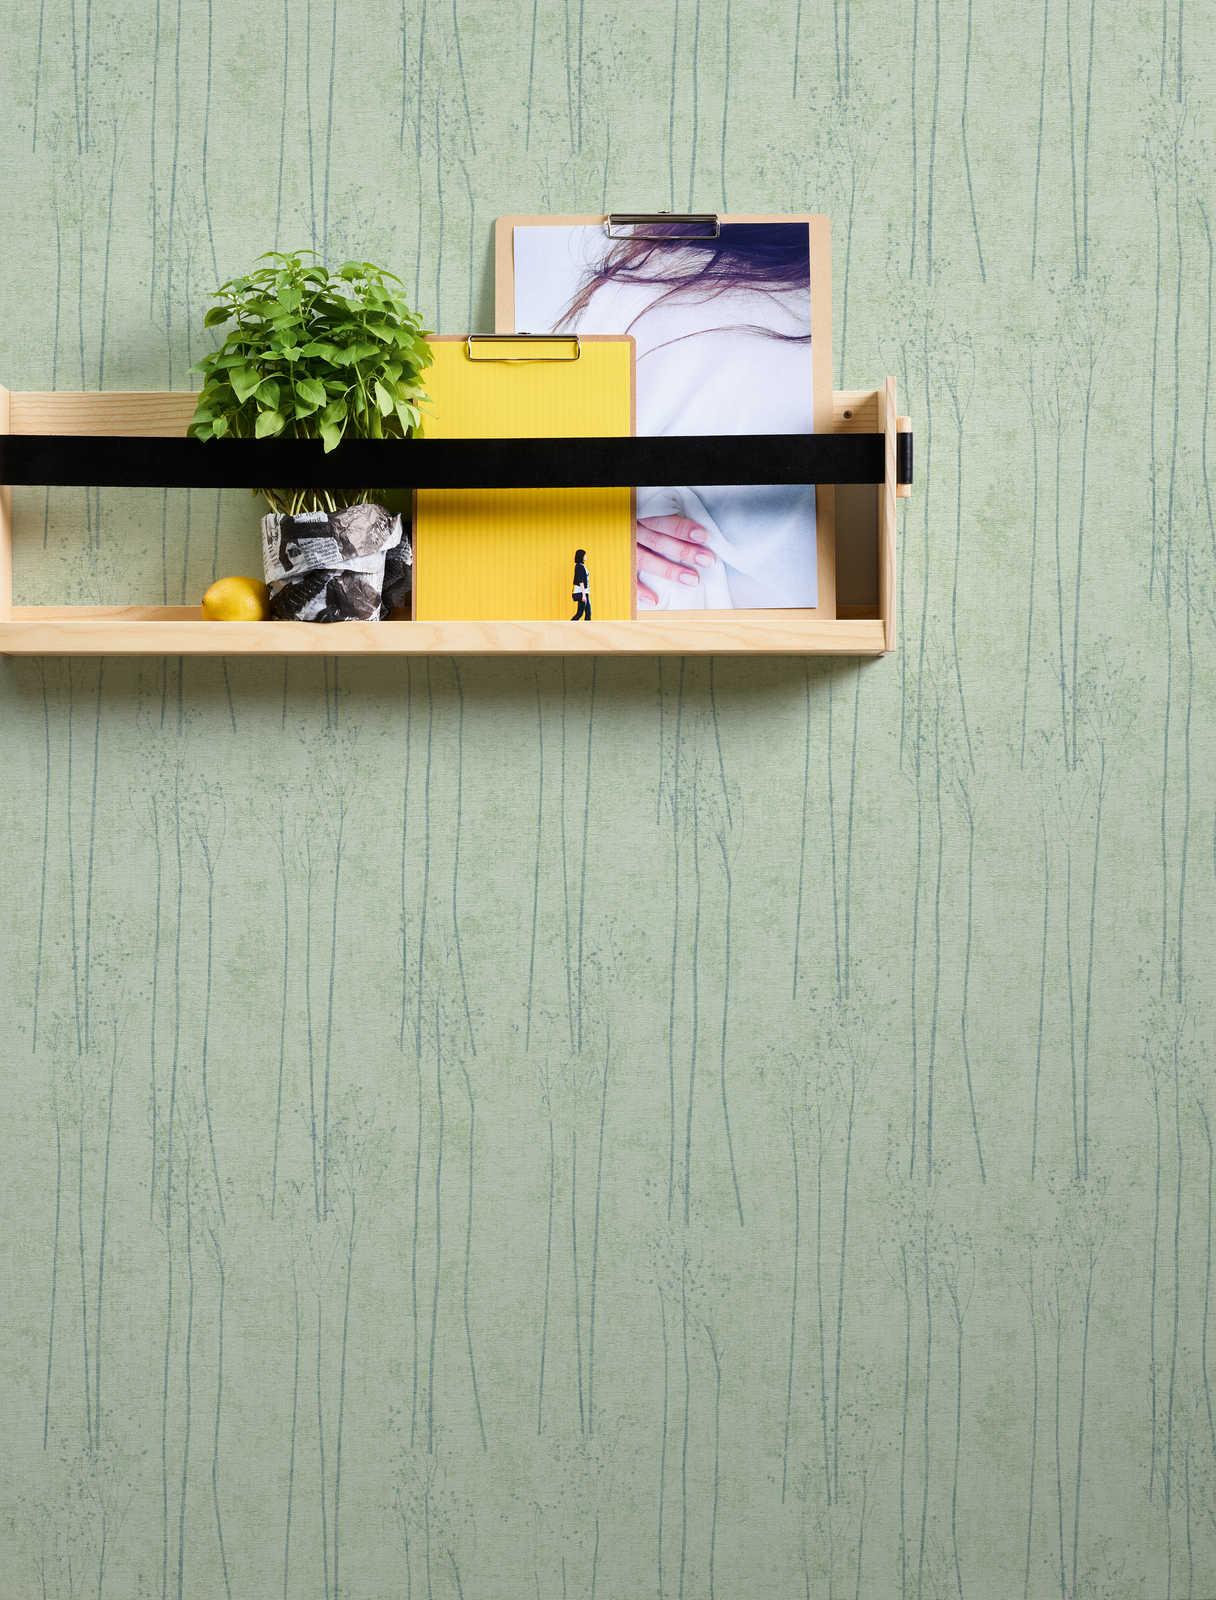             Mint green wallpaper with nature design in Scandi style - green
        